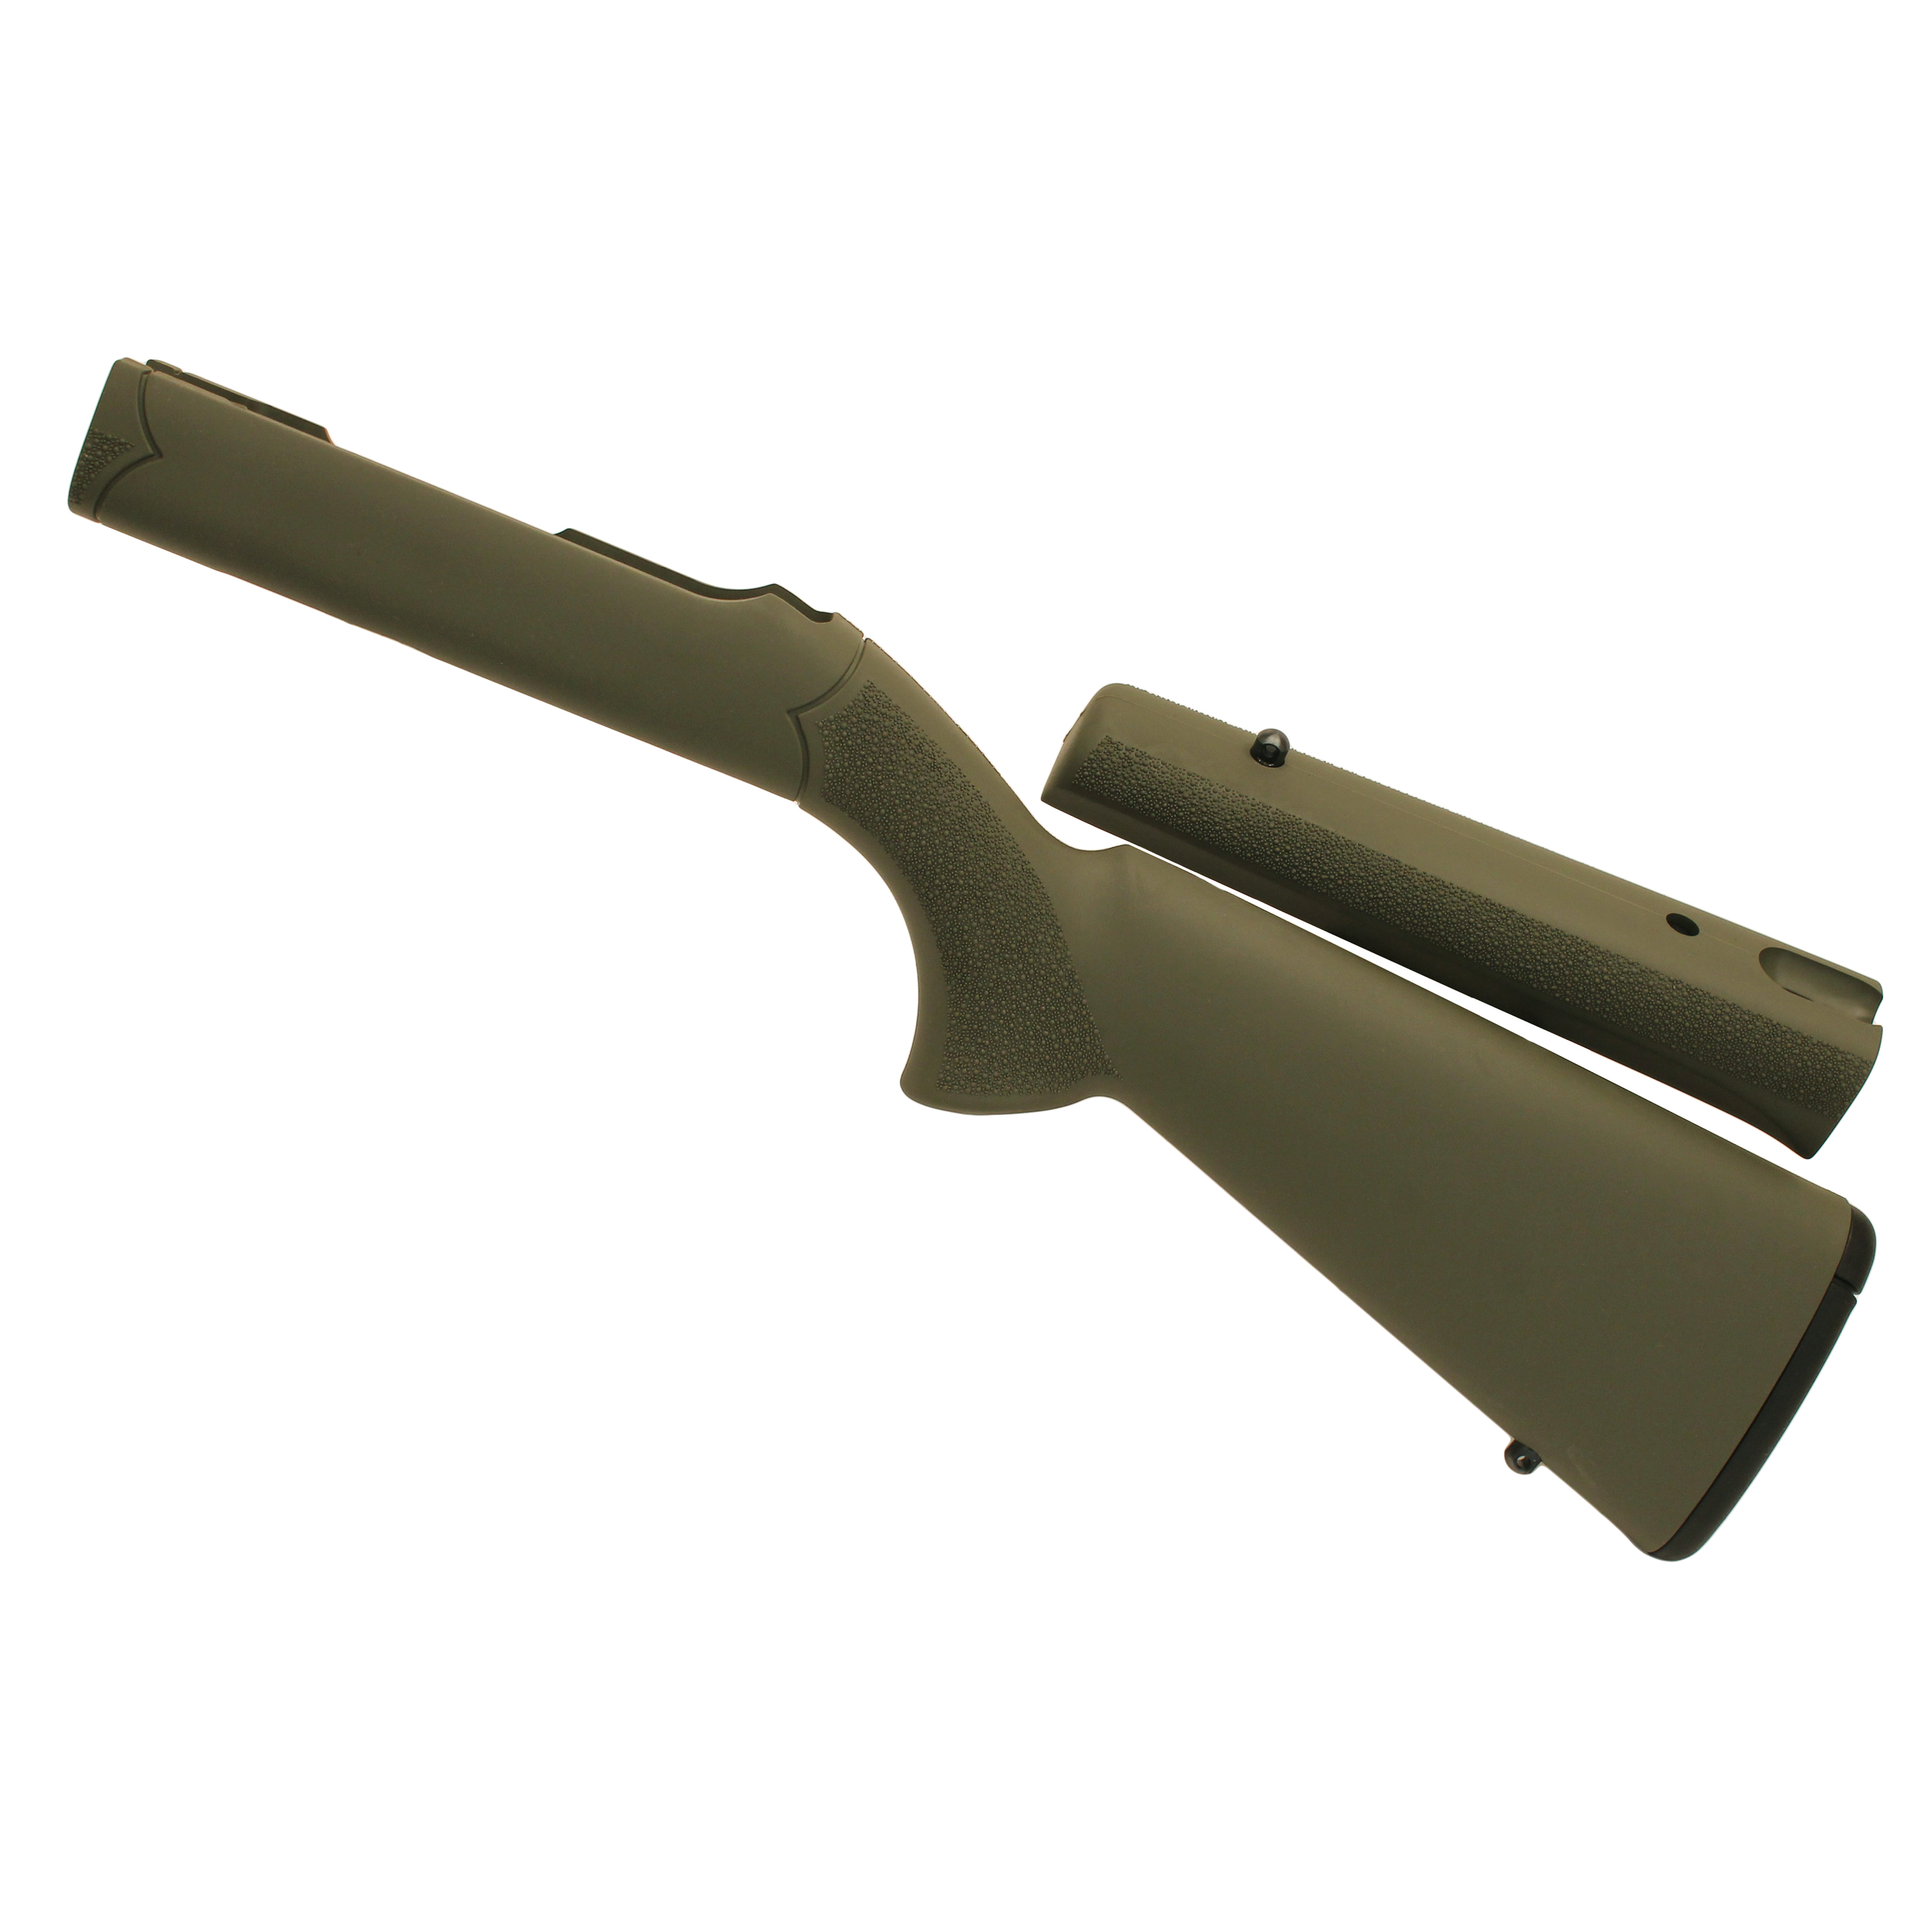 Takedown.920 Barrel Hogue 21250 10/22 OverMolded Stock Olive Drab Green 